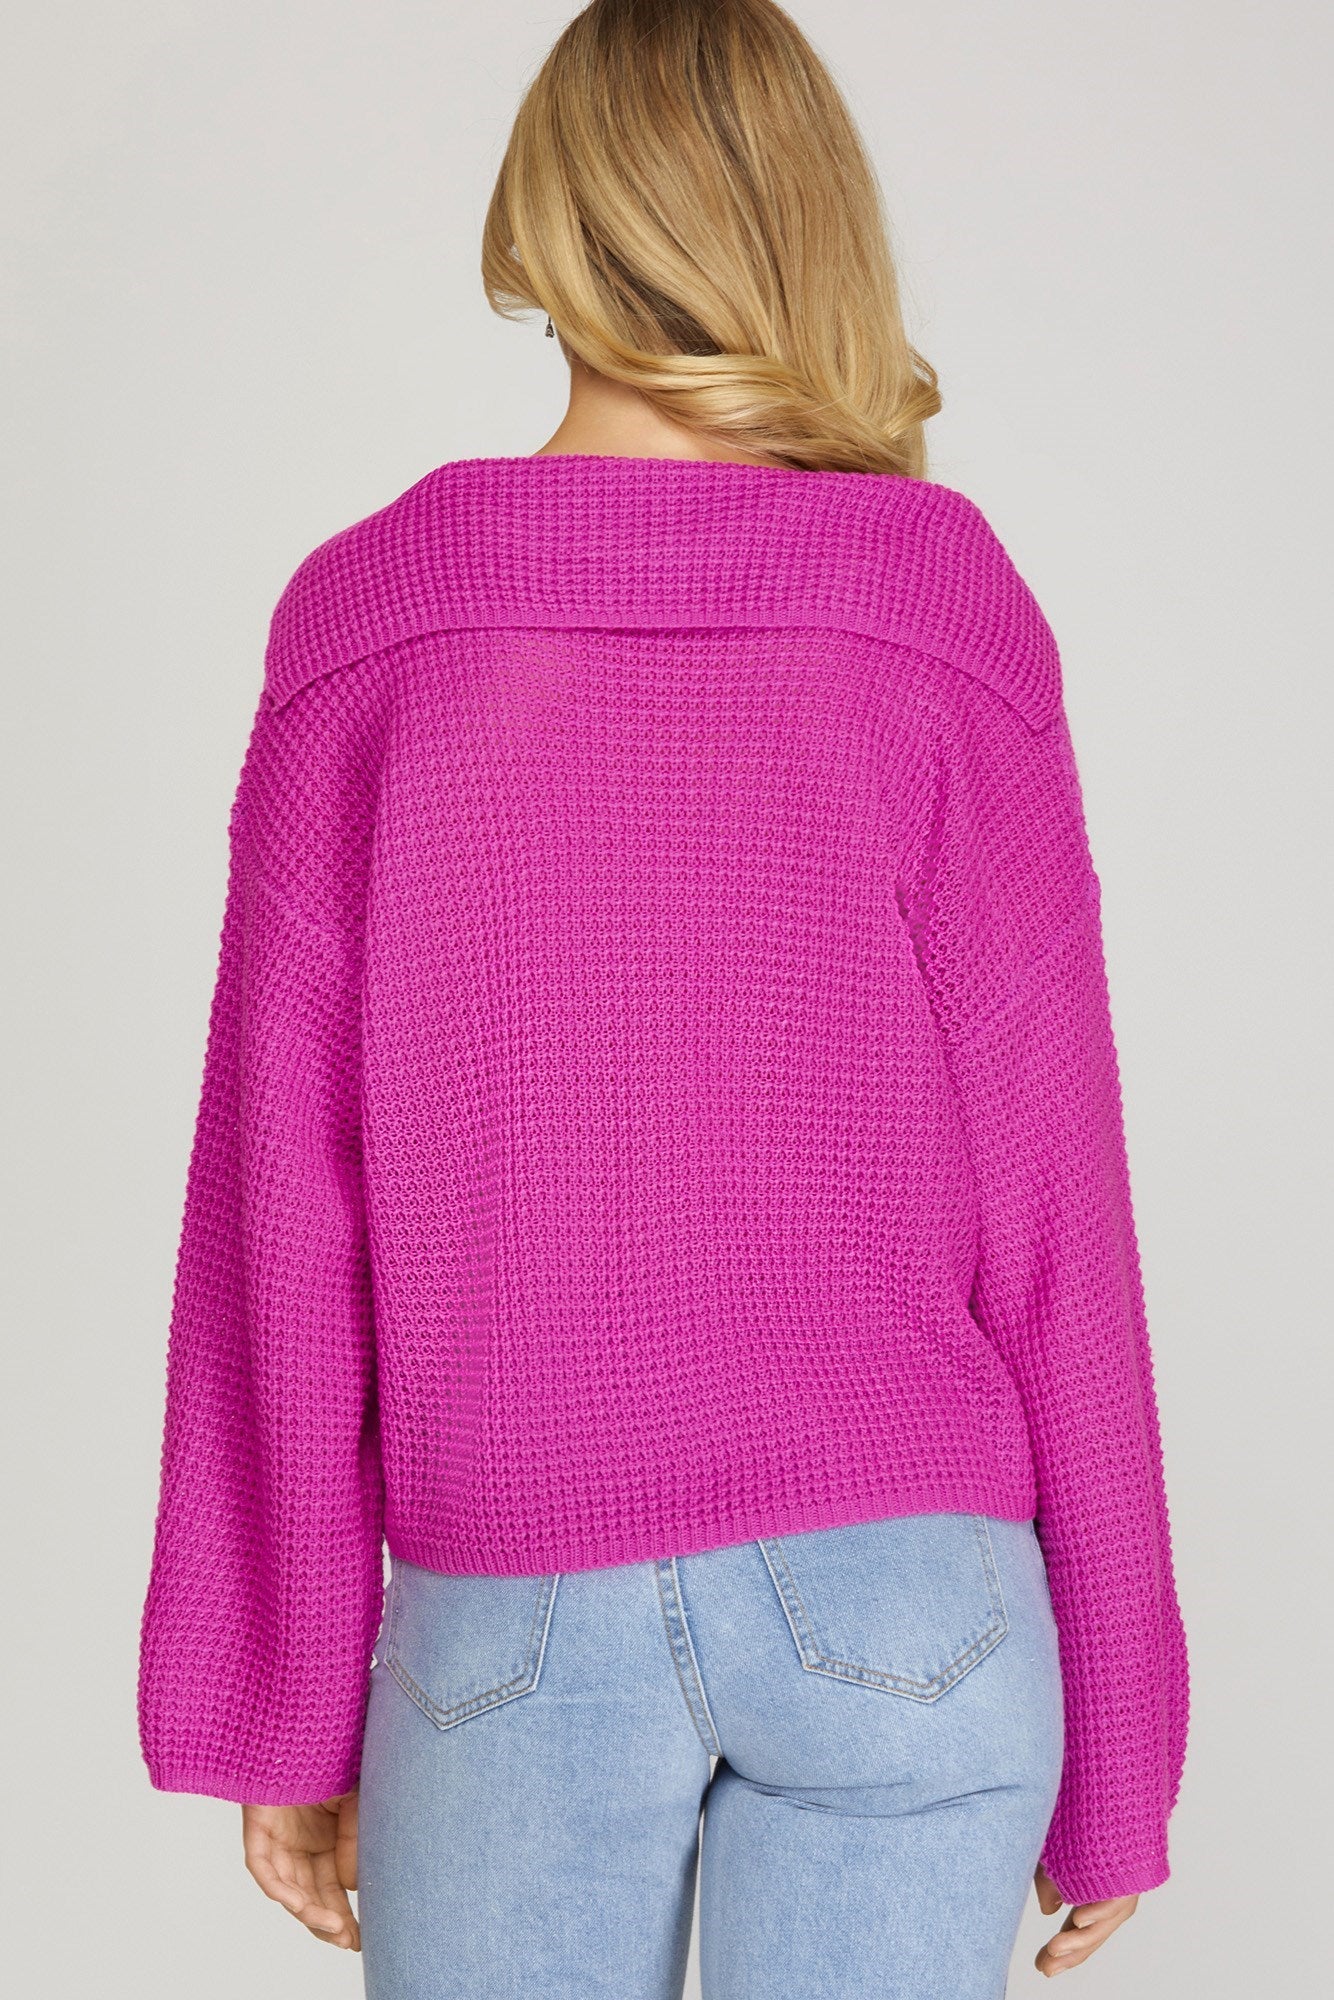 Hot Pink Collared Sweater